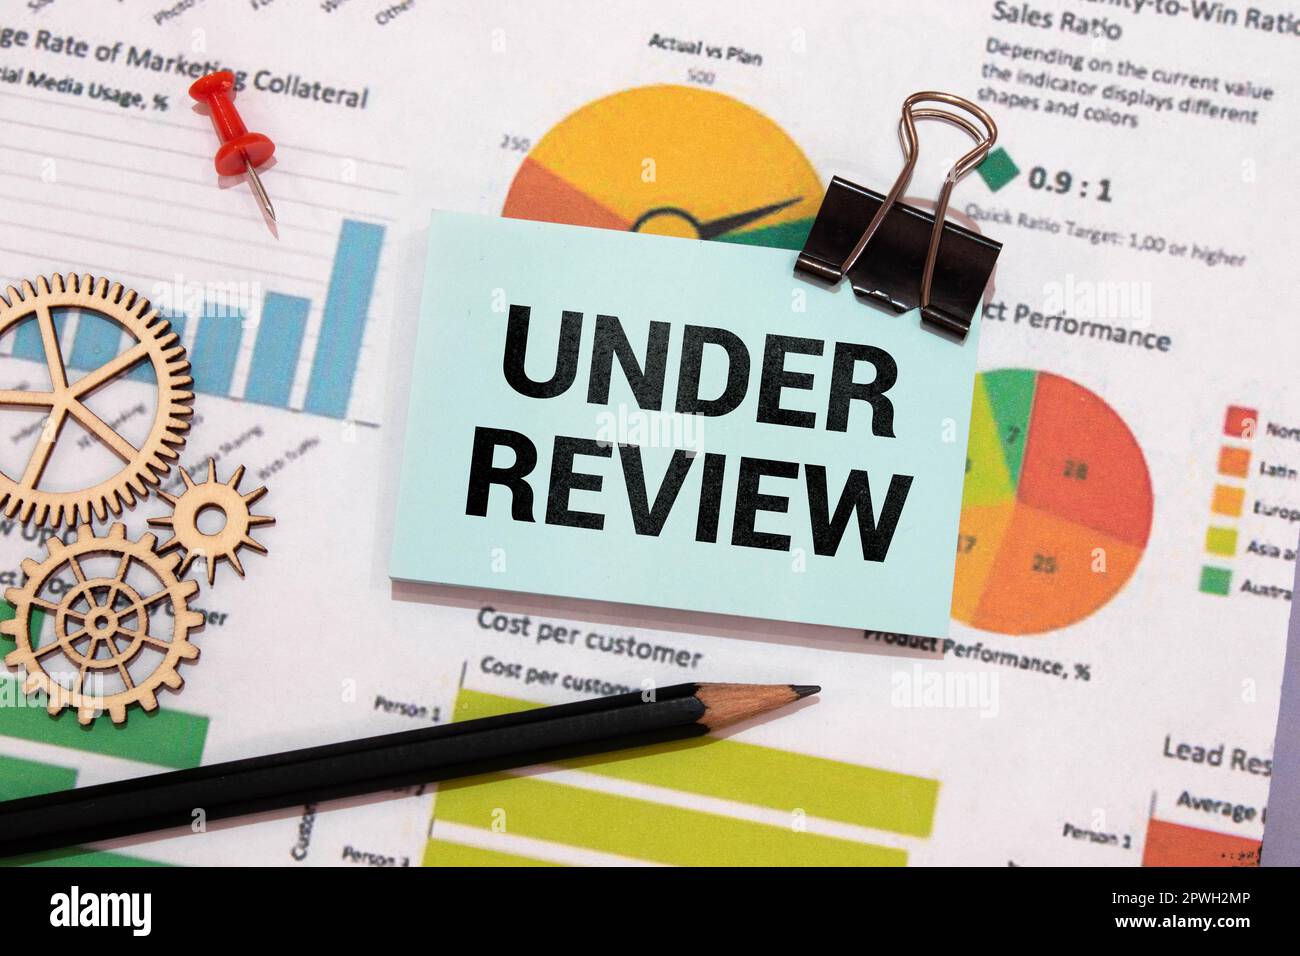 under review. text is written on white paper on a wooden table Stock Photo